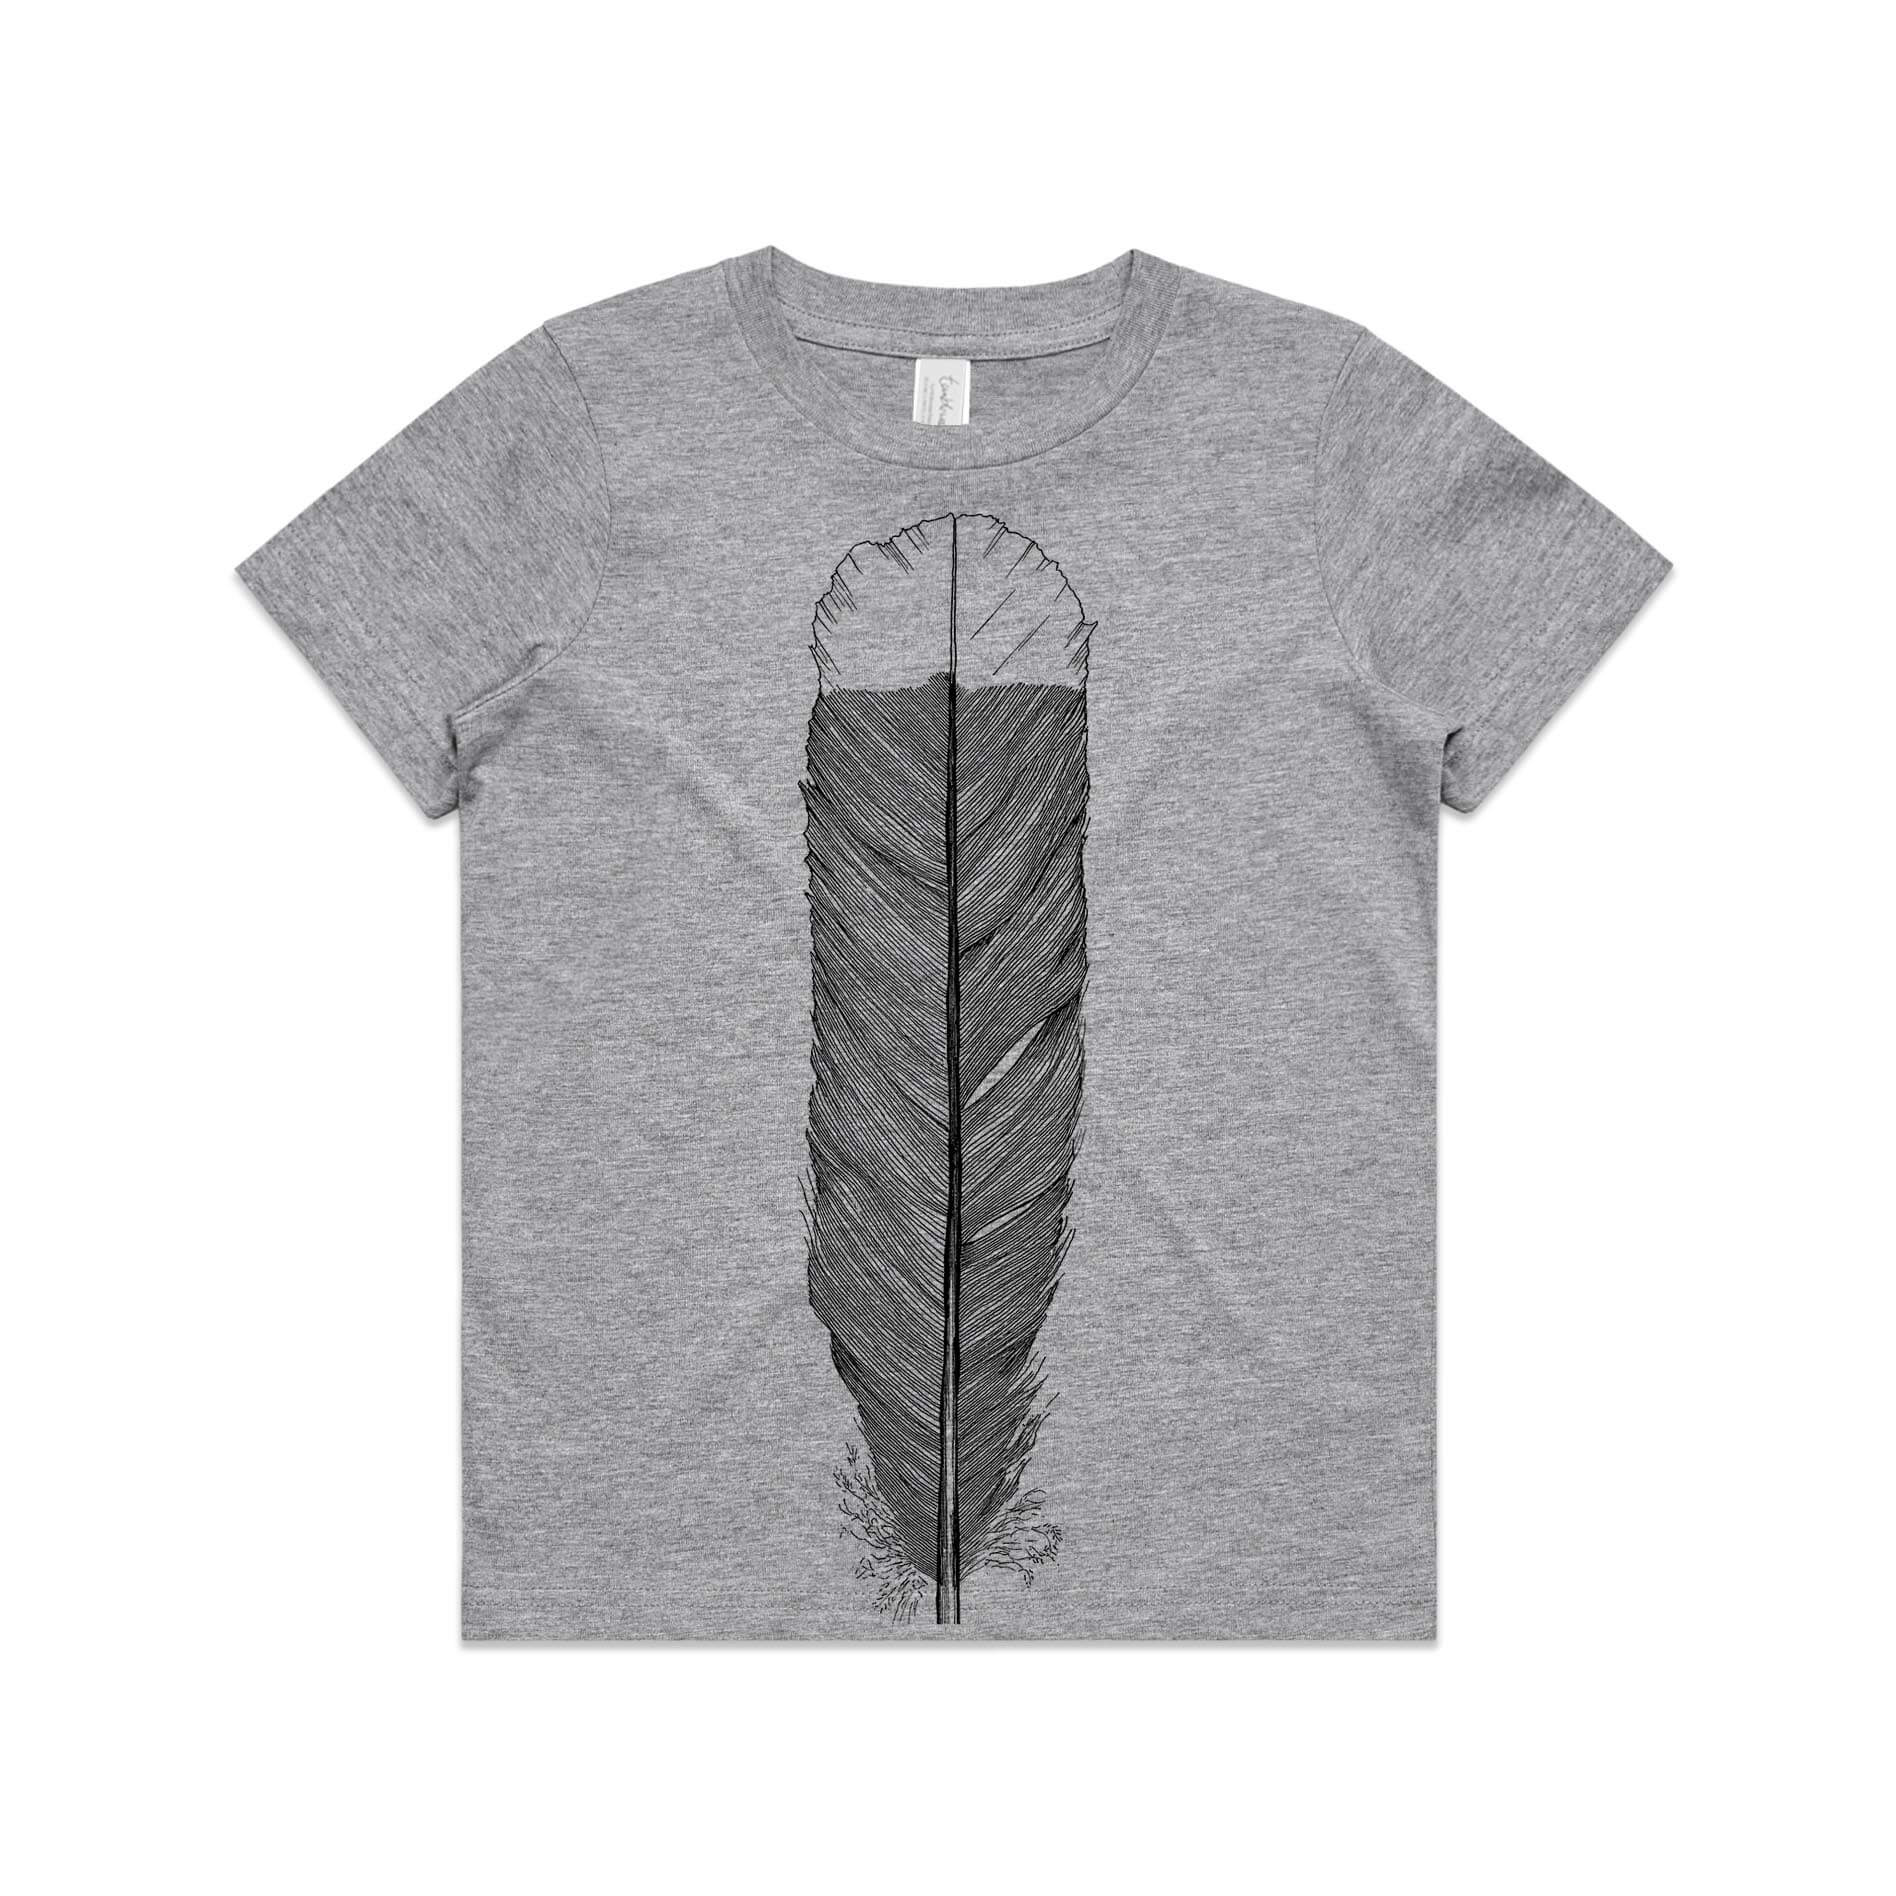 Grey marle, cotton kids' t-shirt with screen printed Kids huia feather design.